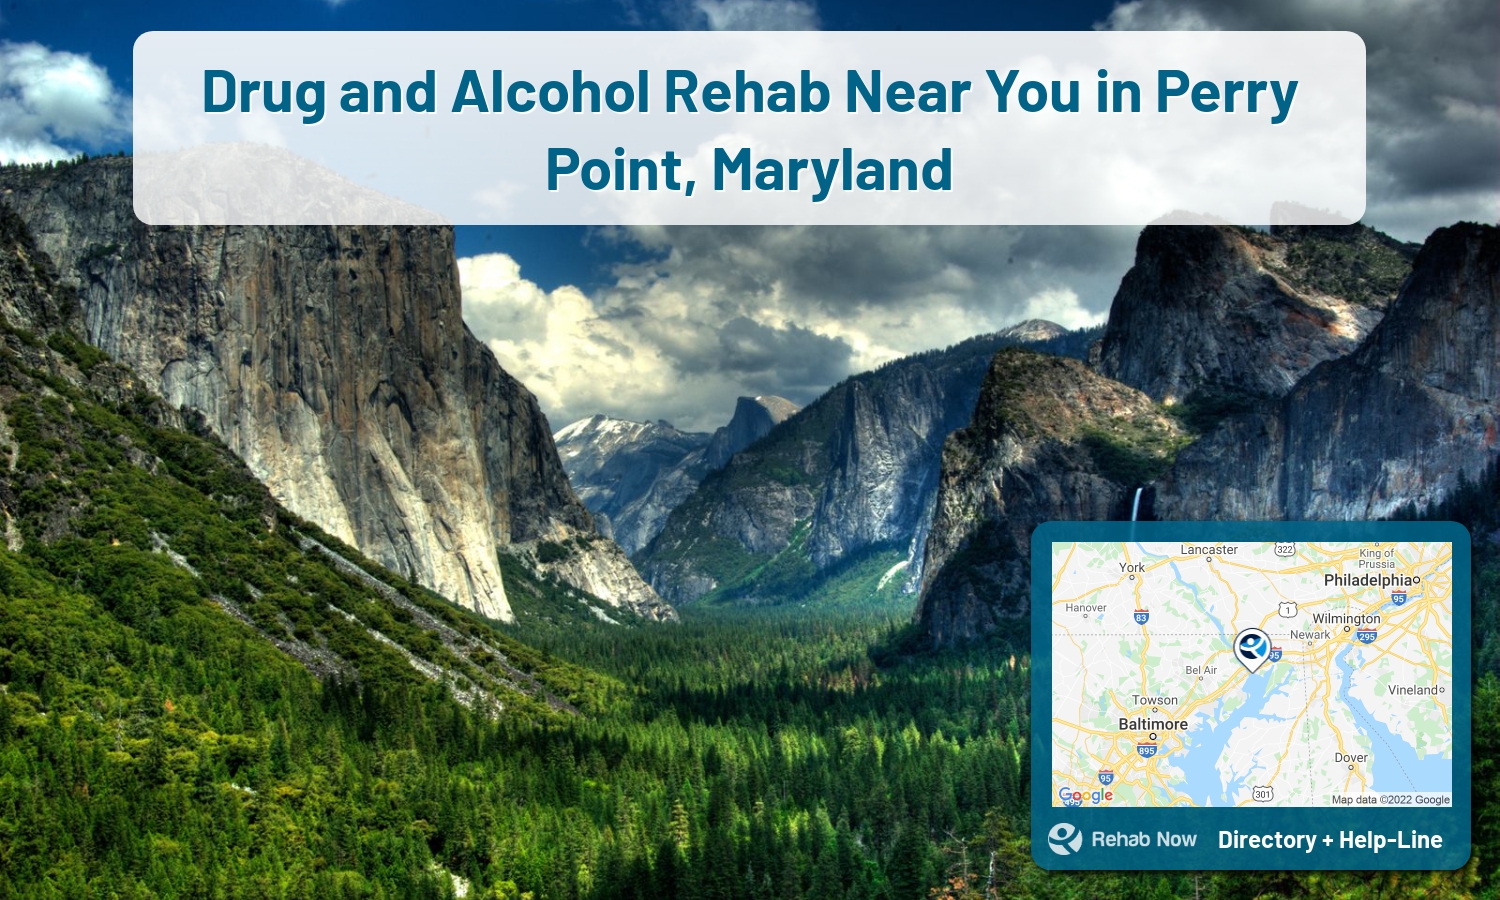 List of alcohol and drug treatment centers near you in Perry Point, Maryland. Research certifications, programs, methods, pricing, and more.